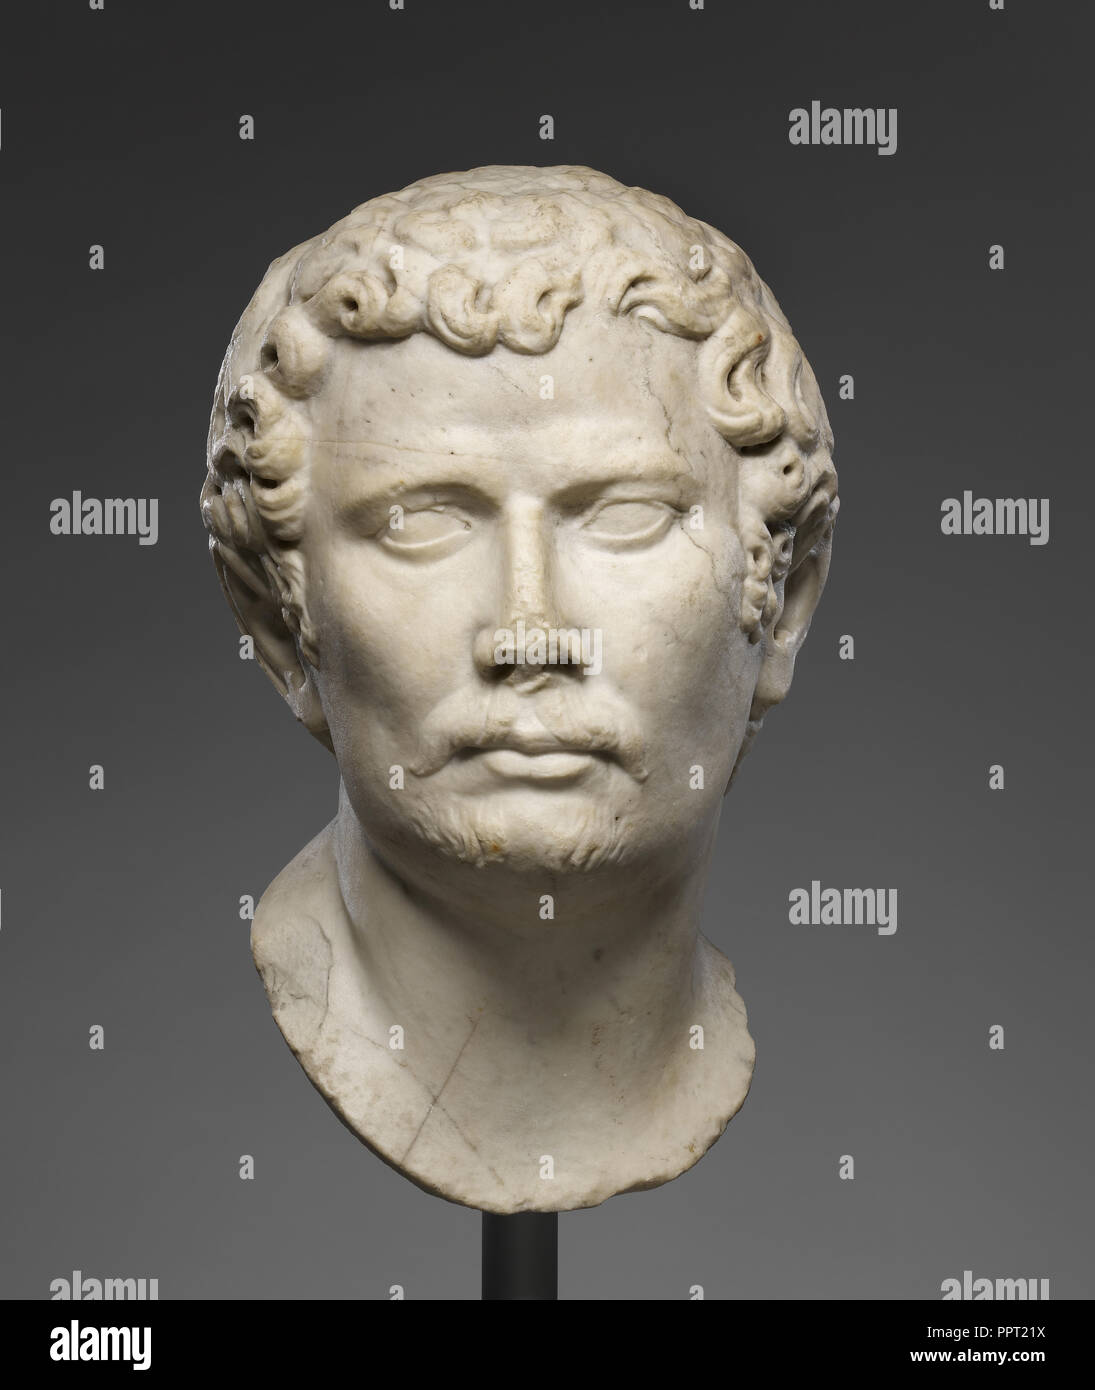 Head of a Barbarian; Roman Empire; early 2nd century; Marble; 45 × 20.5 × 20.9 cm, 17 11,16 × 8 1,16 × 8 1,4 in Stock Photo